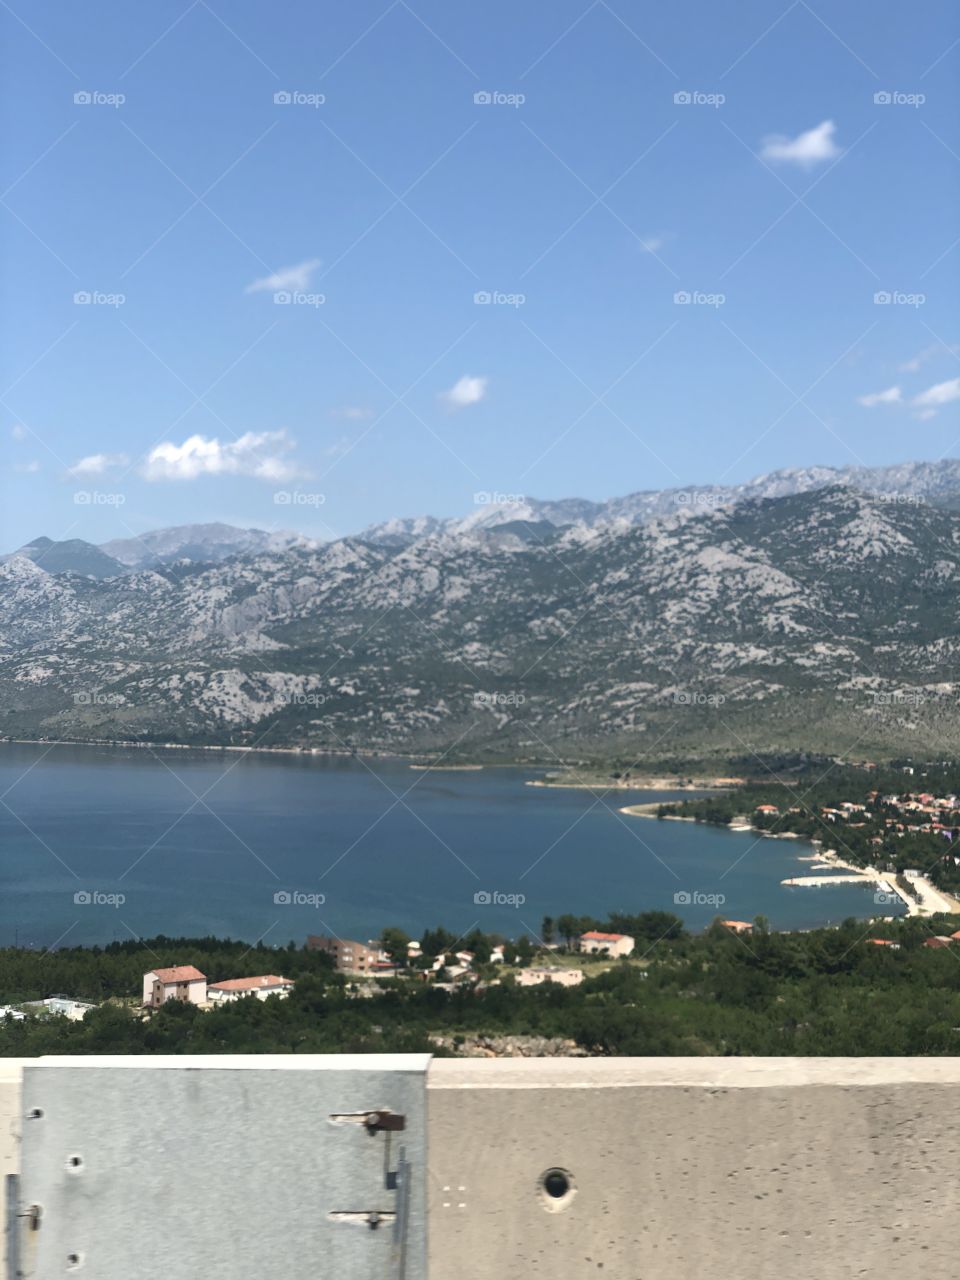 This was taken in Croatia while driving to a city called zadar very beautiful and scenery.